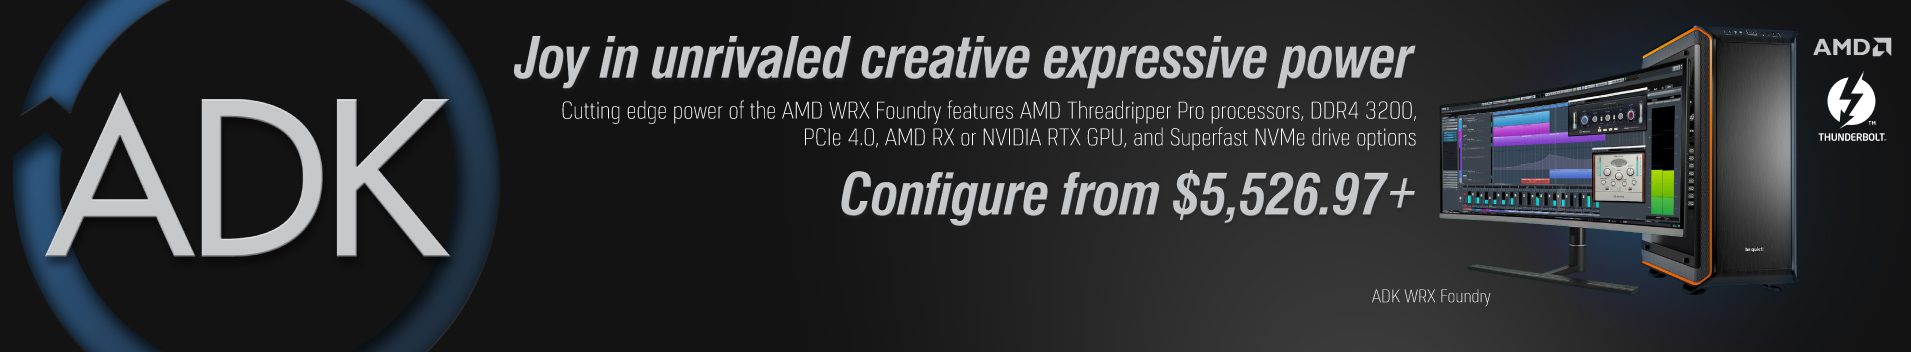 AMD WRX Foundry features AMD Threadripper Pro processors, DDR 3200, PCIe 4.0, AMD RX or NVIDIA RTX GPU, and Superfast NVMe drive options.